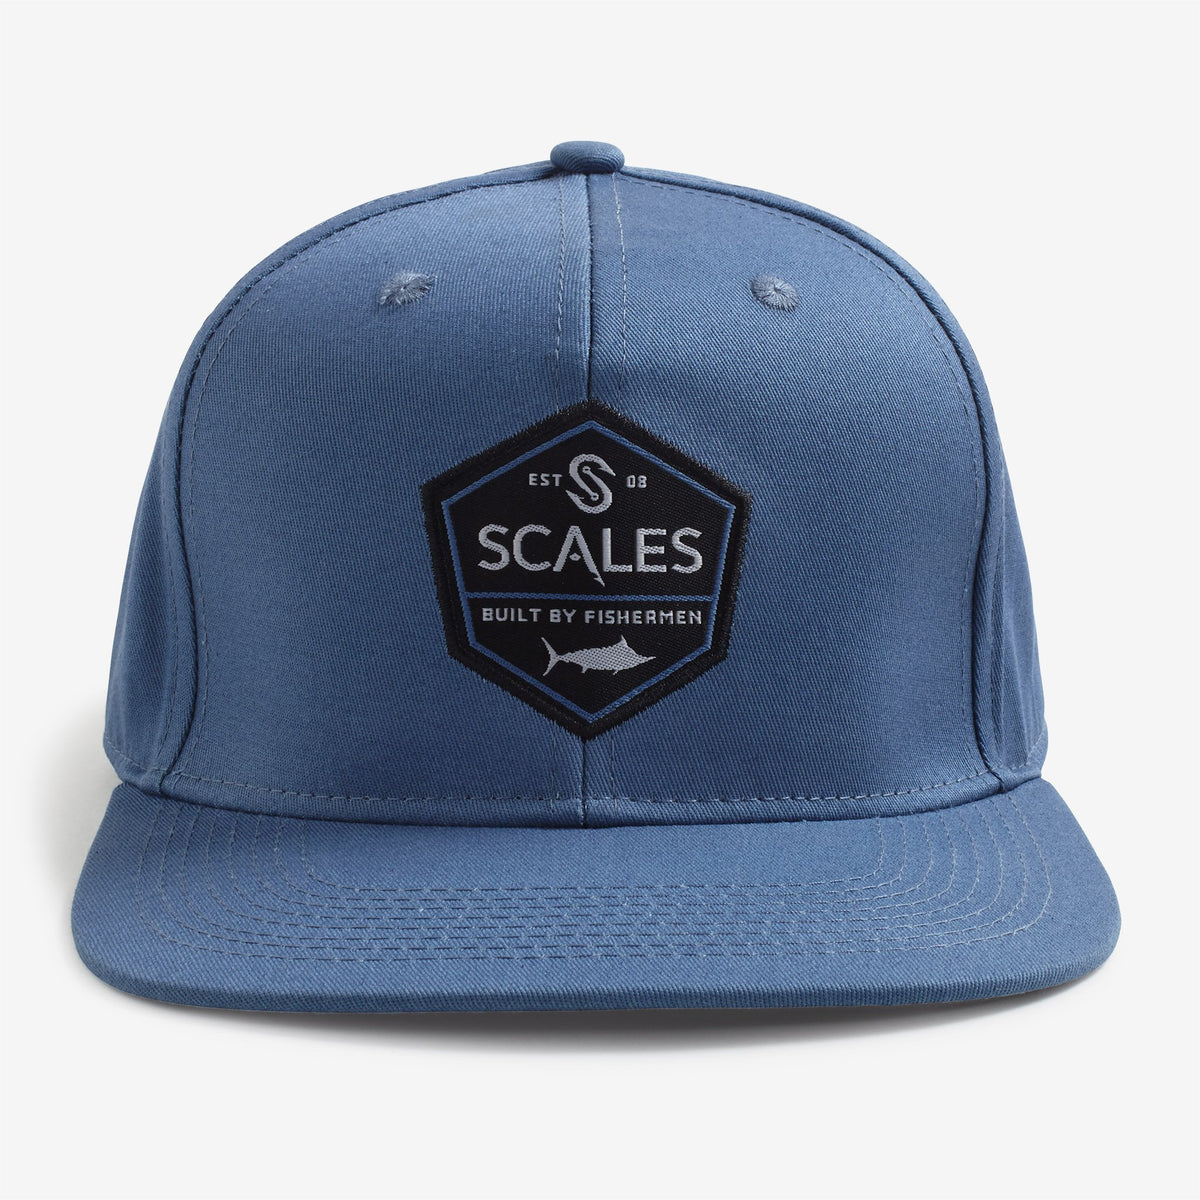 SCALES Built By Fishermen Snapback